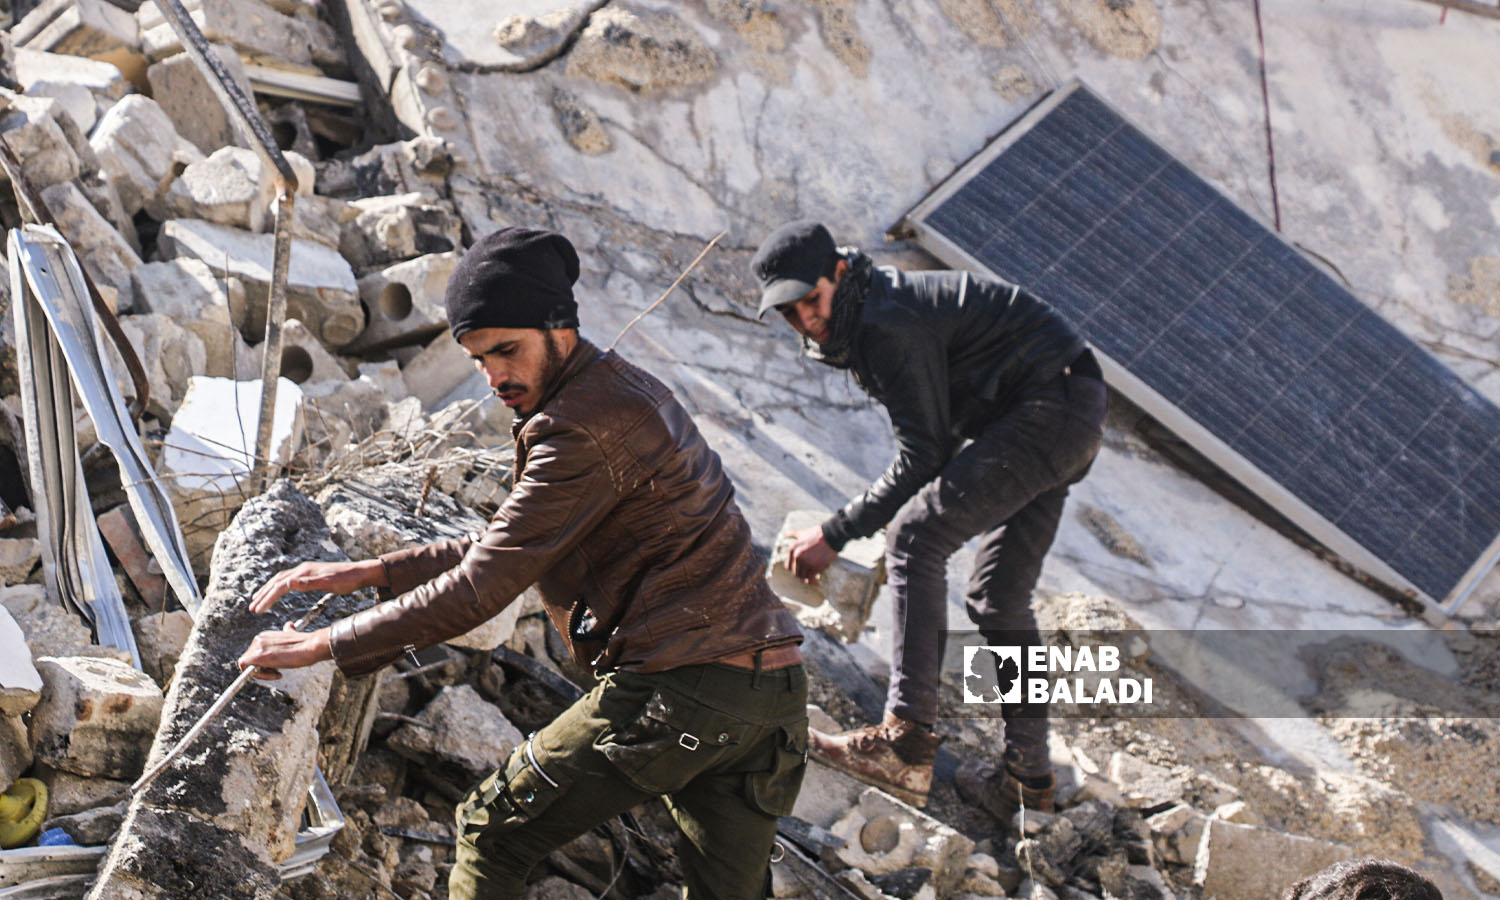 Volunteers try to rescue and recover victims from under the rubble in Armanaz town following the earthquake that hit the northwestern Syrian region - February 7, 2023 (Enab Baladi/Iyad Abdul Jawad)
